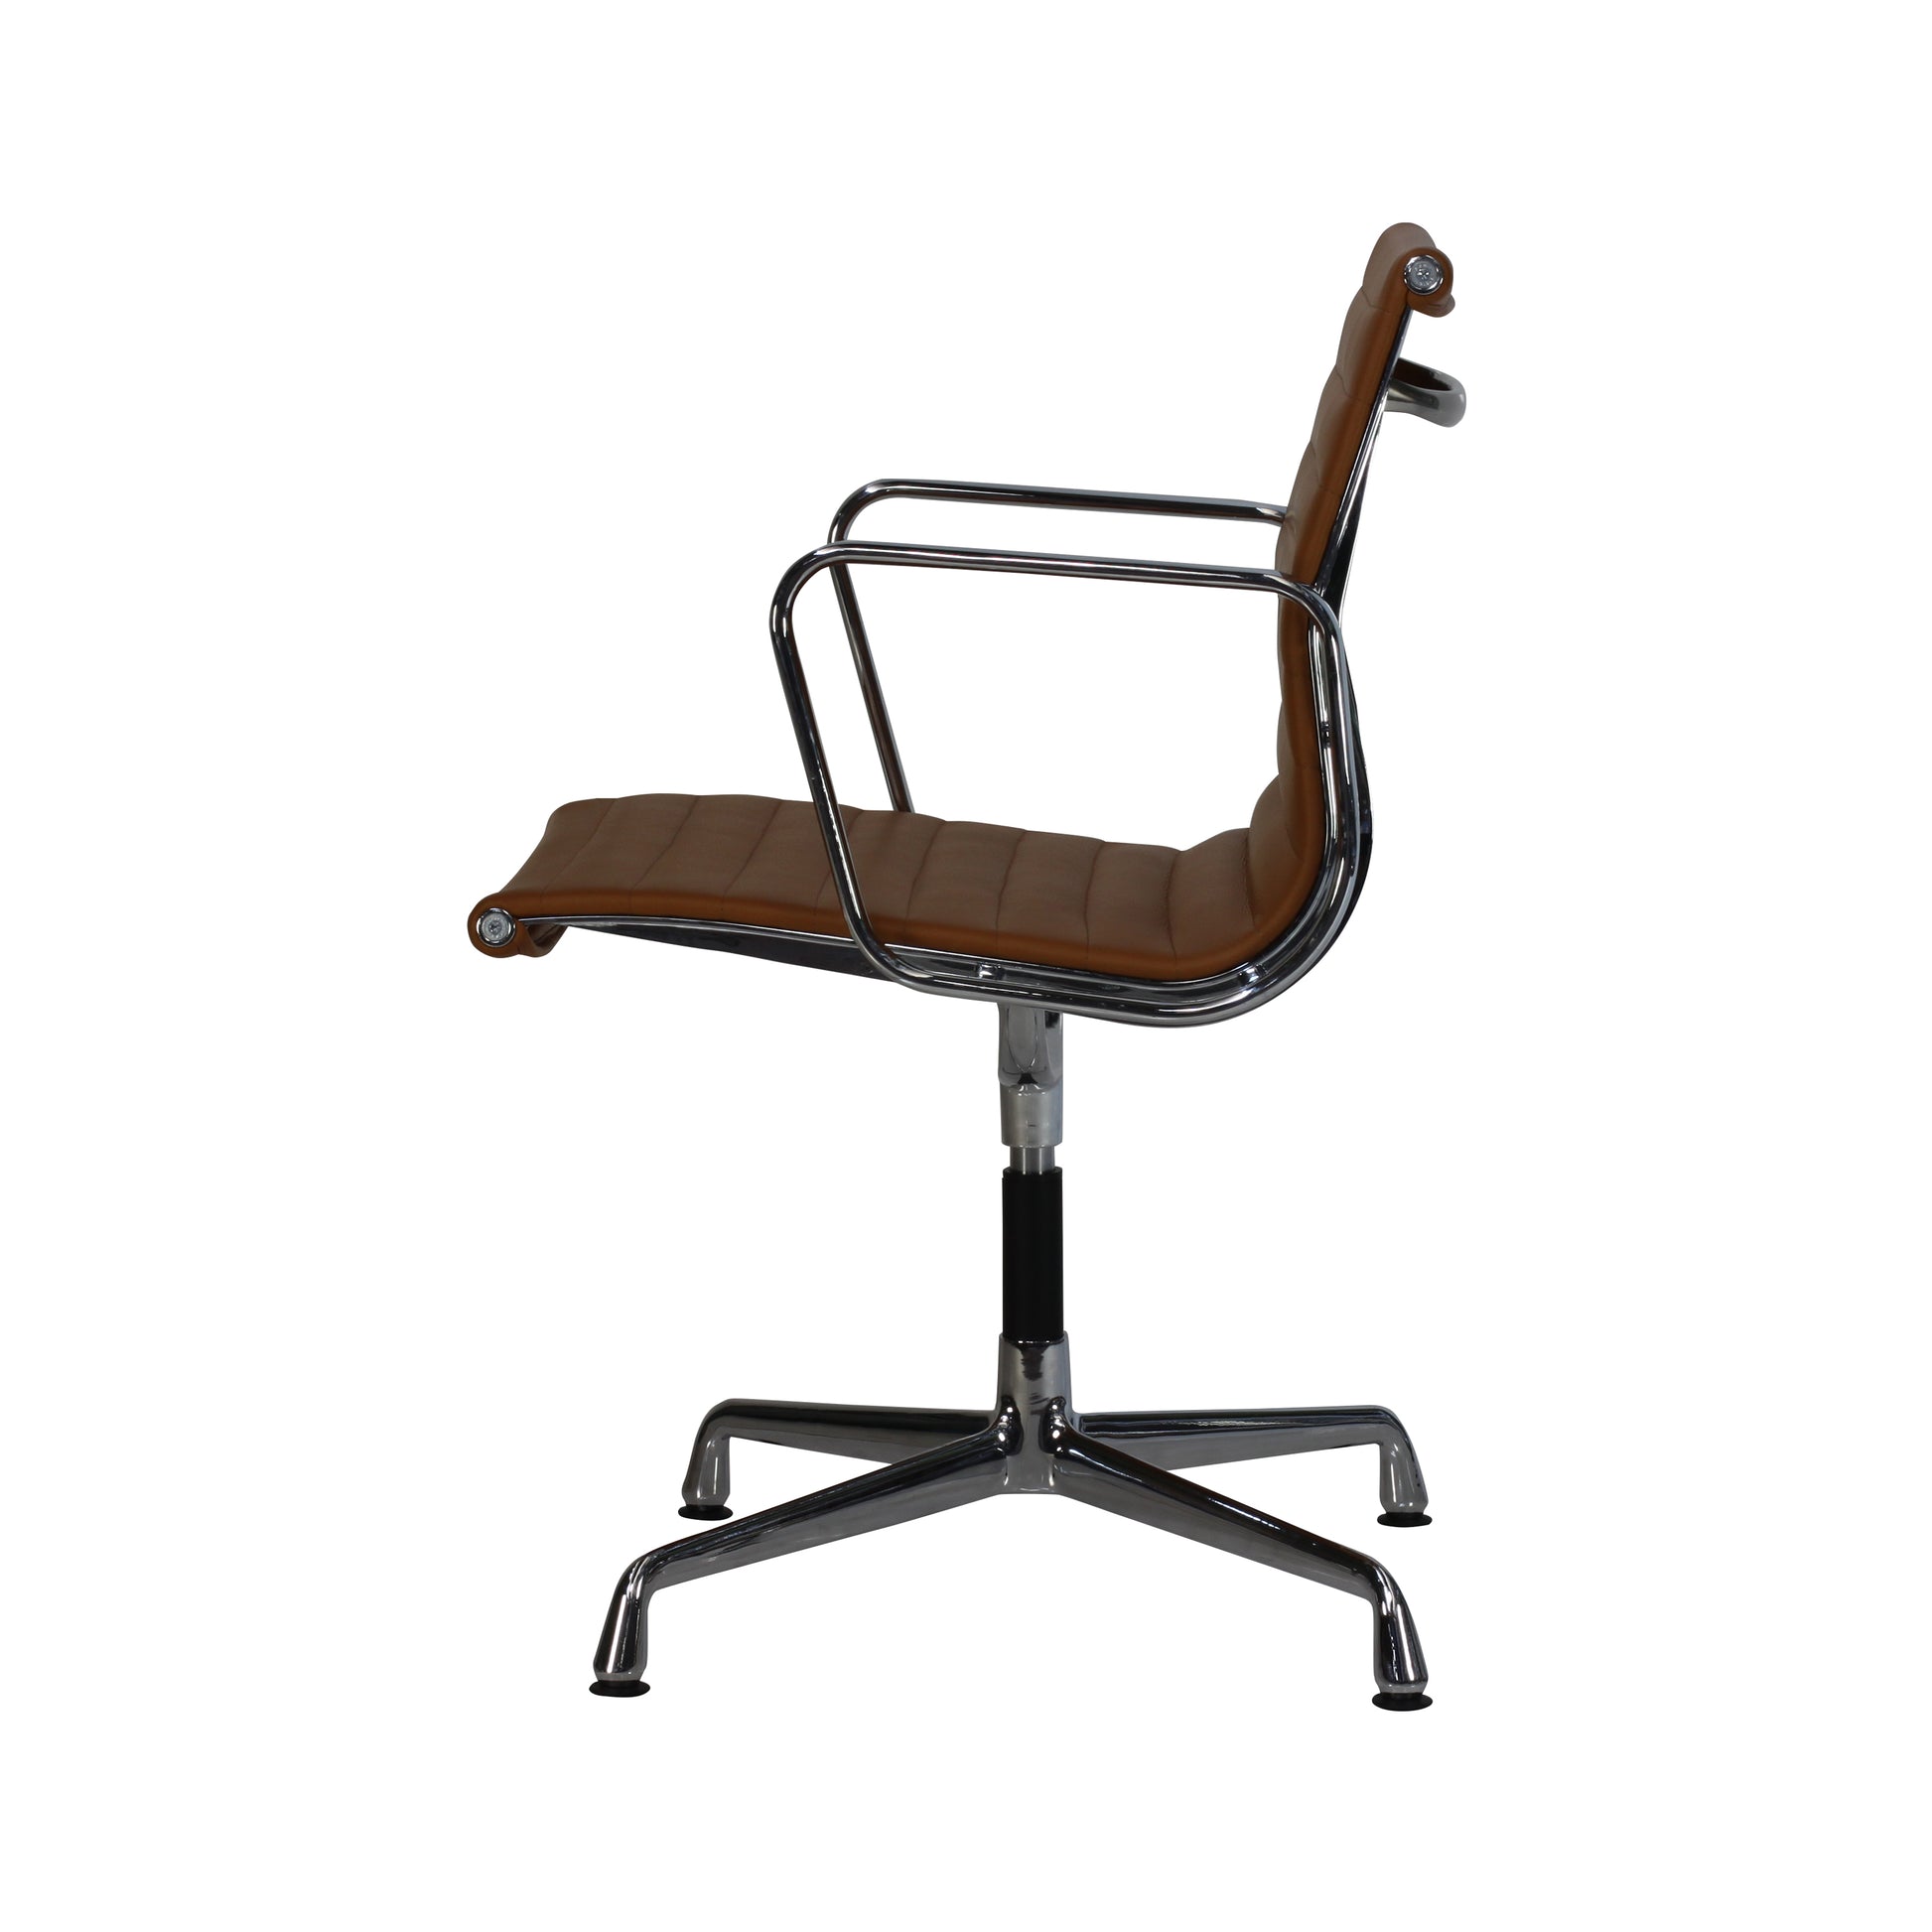 Chair without wheels aluminium style | Cognac Leather | Side